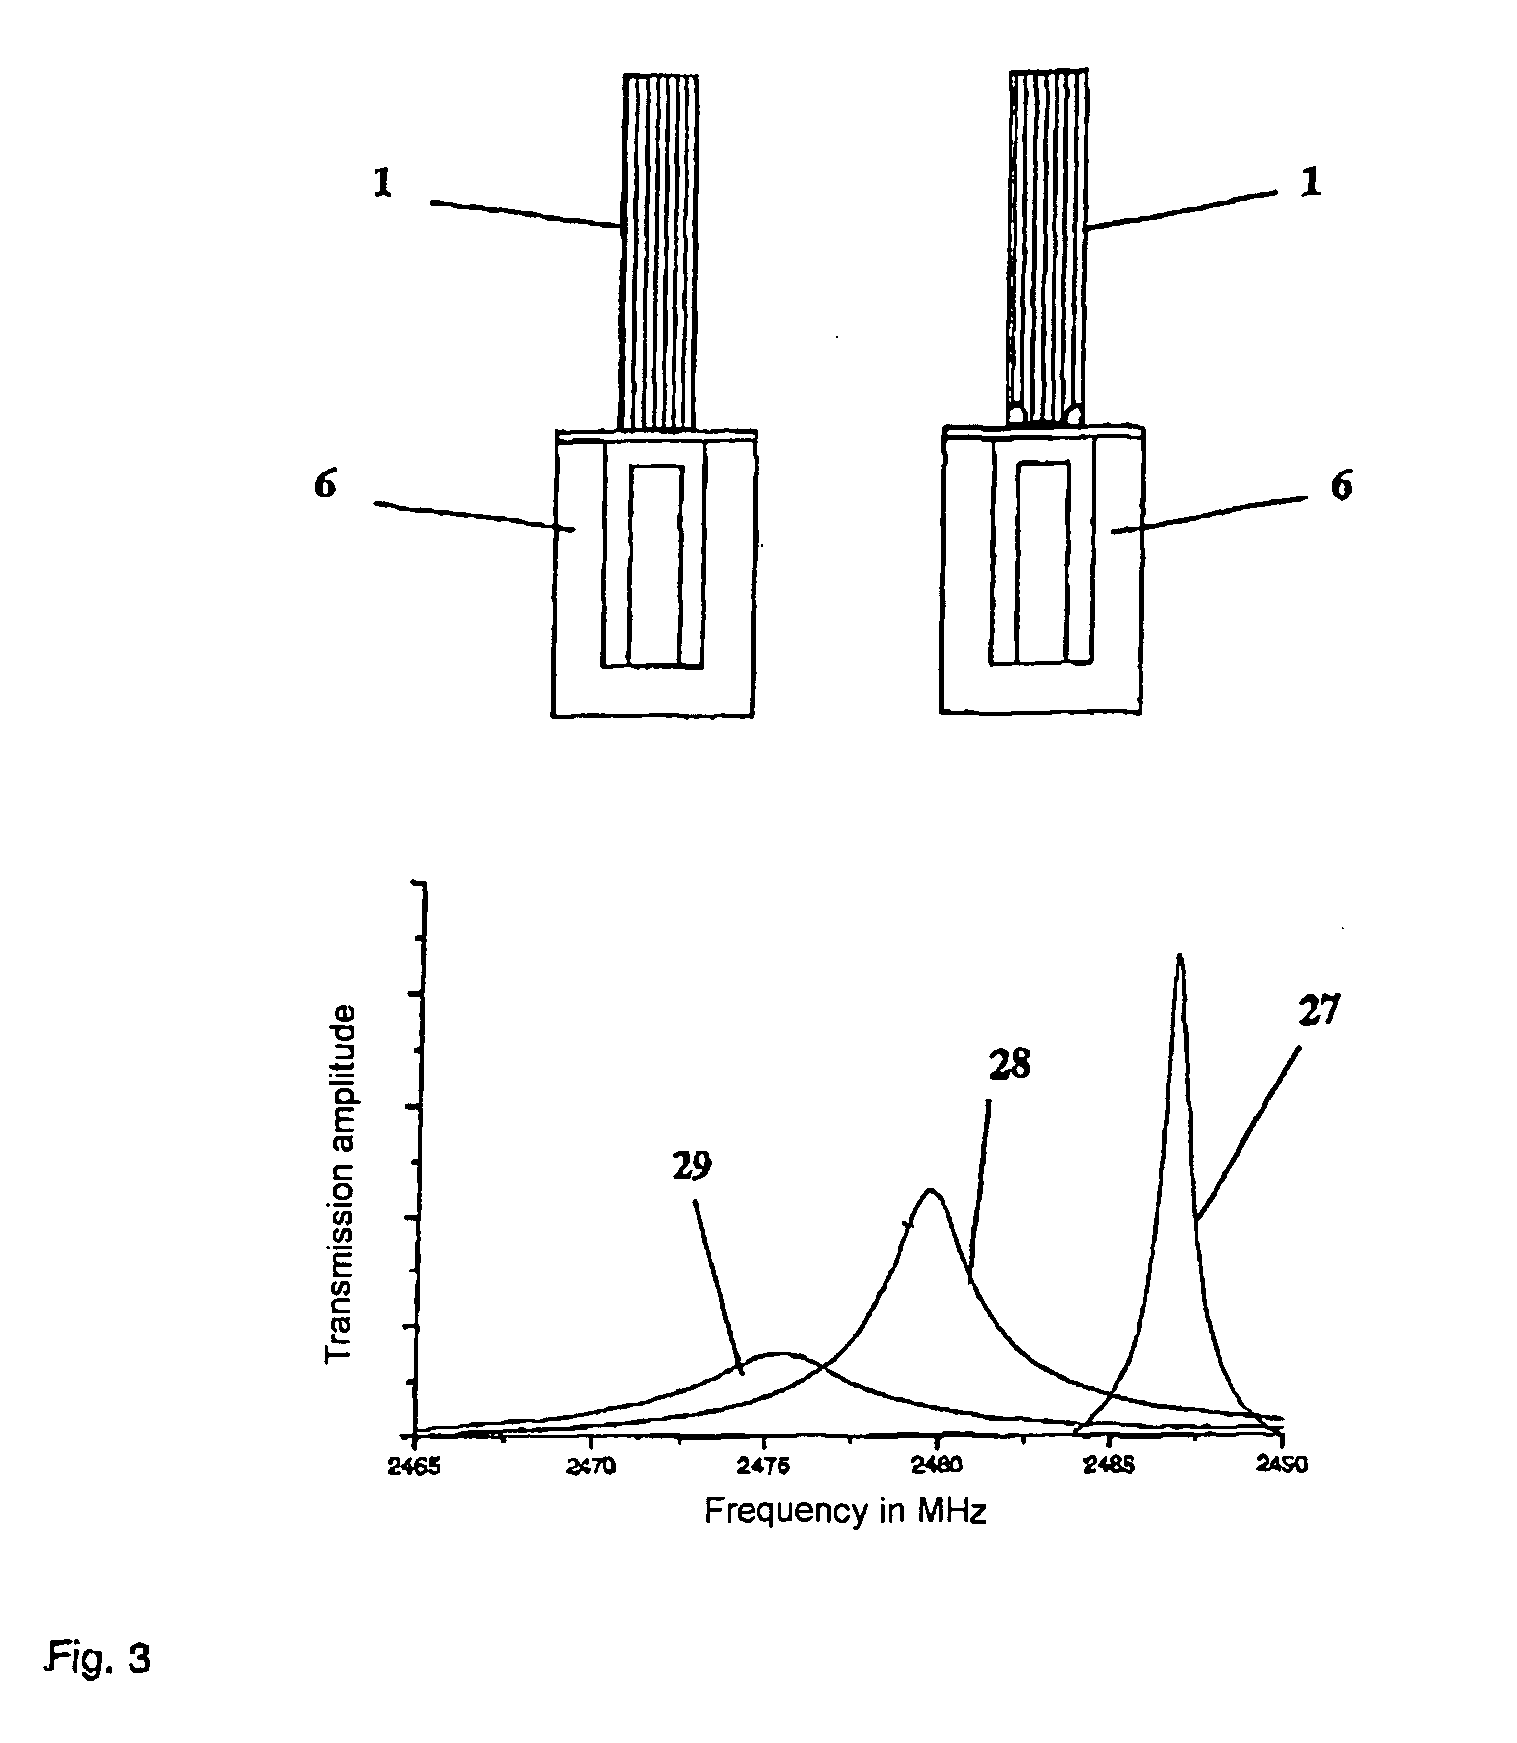 Apparatus and method for detection and segregation of faulty cigarettes